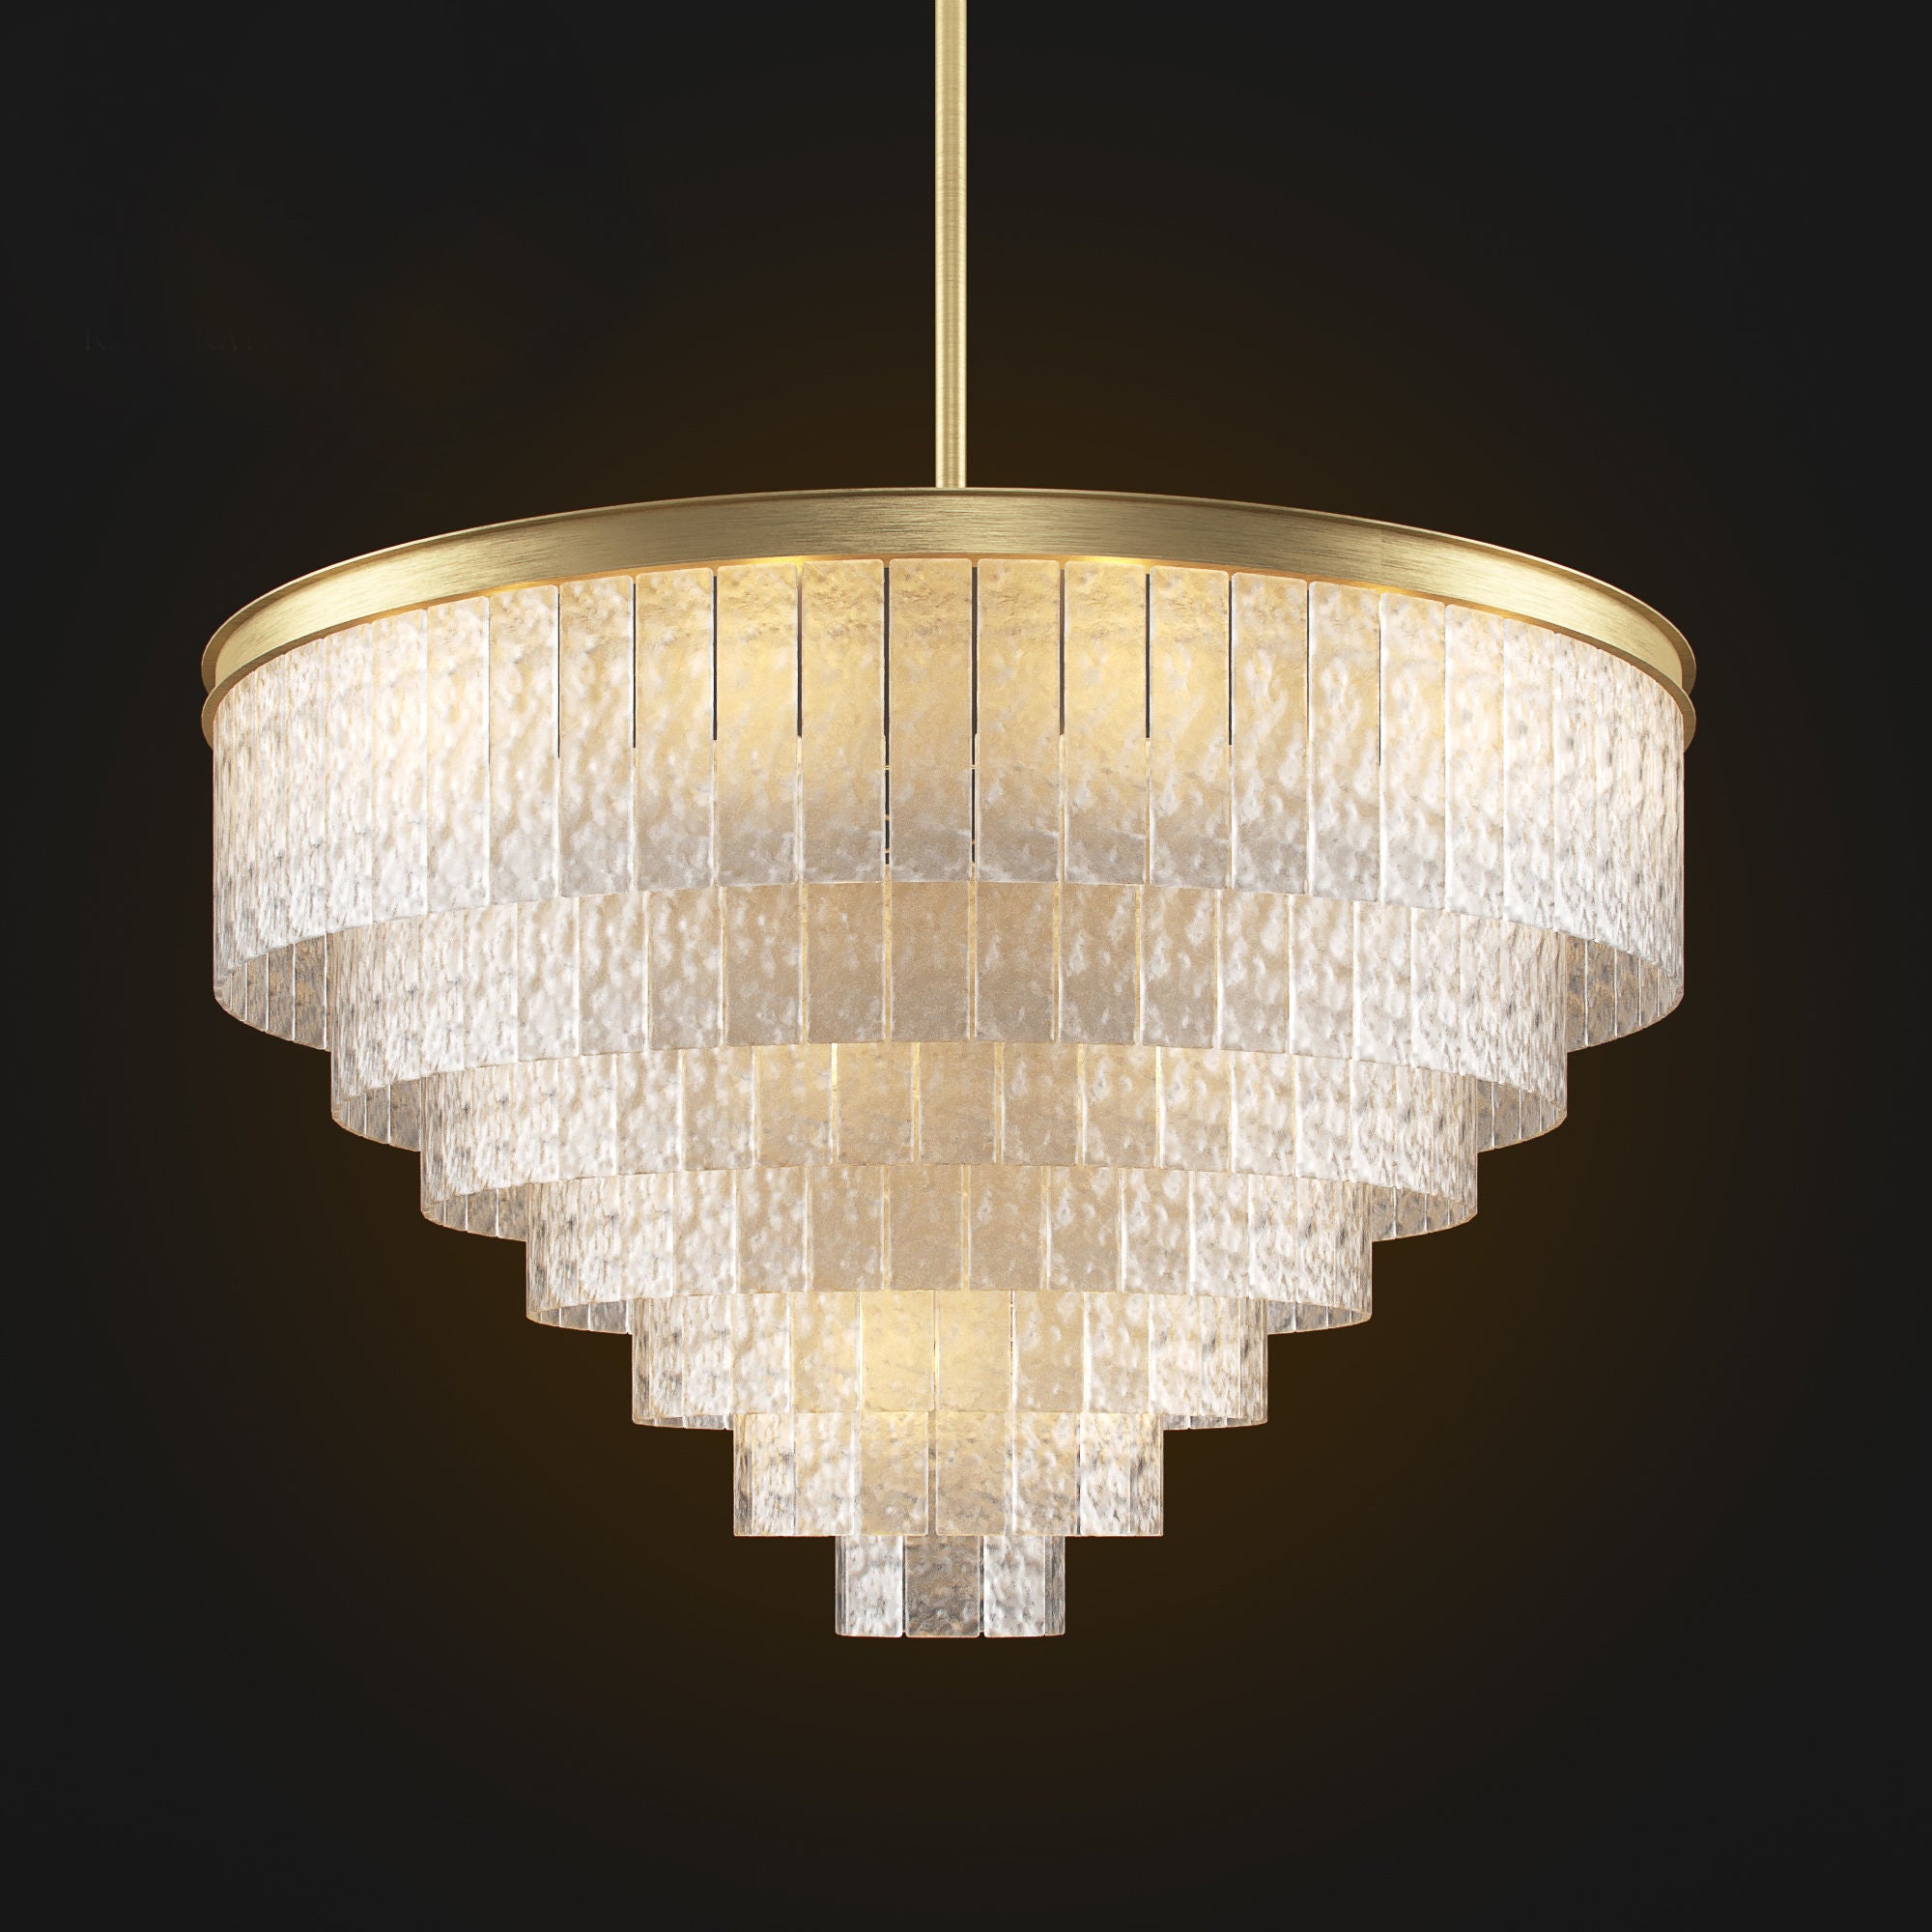 Oliver Round Tiered Glass Tile Chandelier Collection - Italian Concept